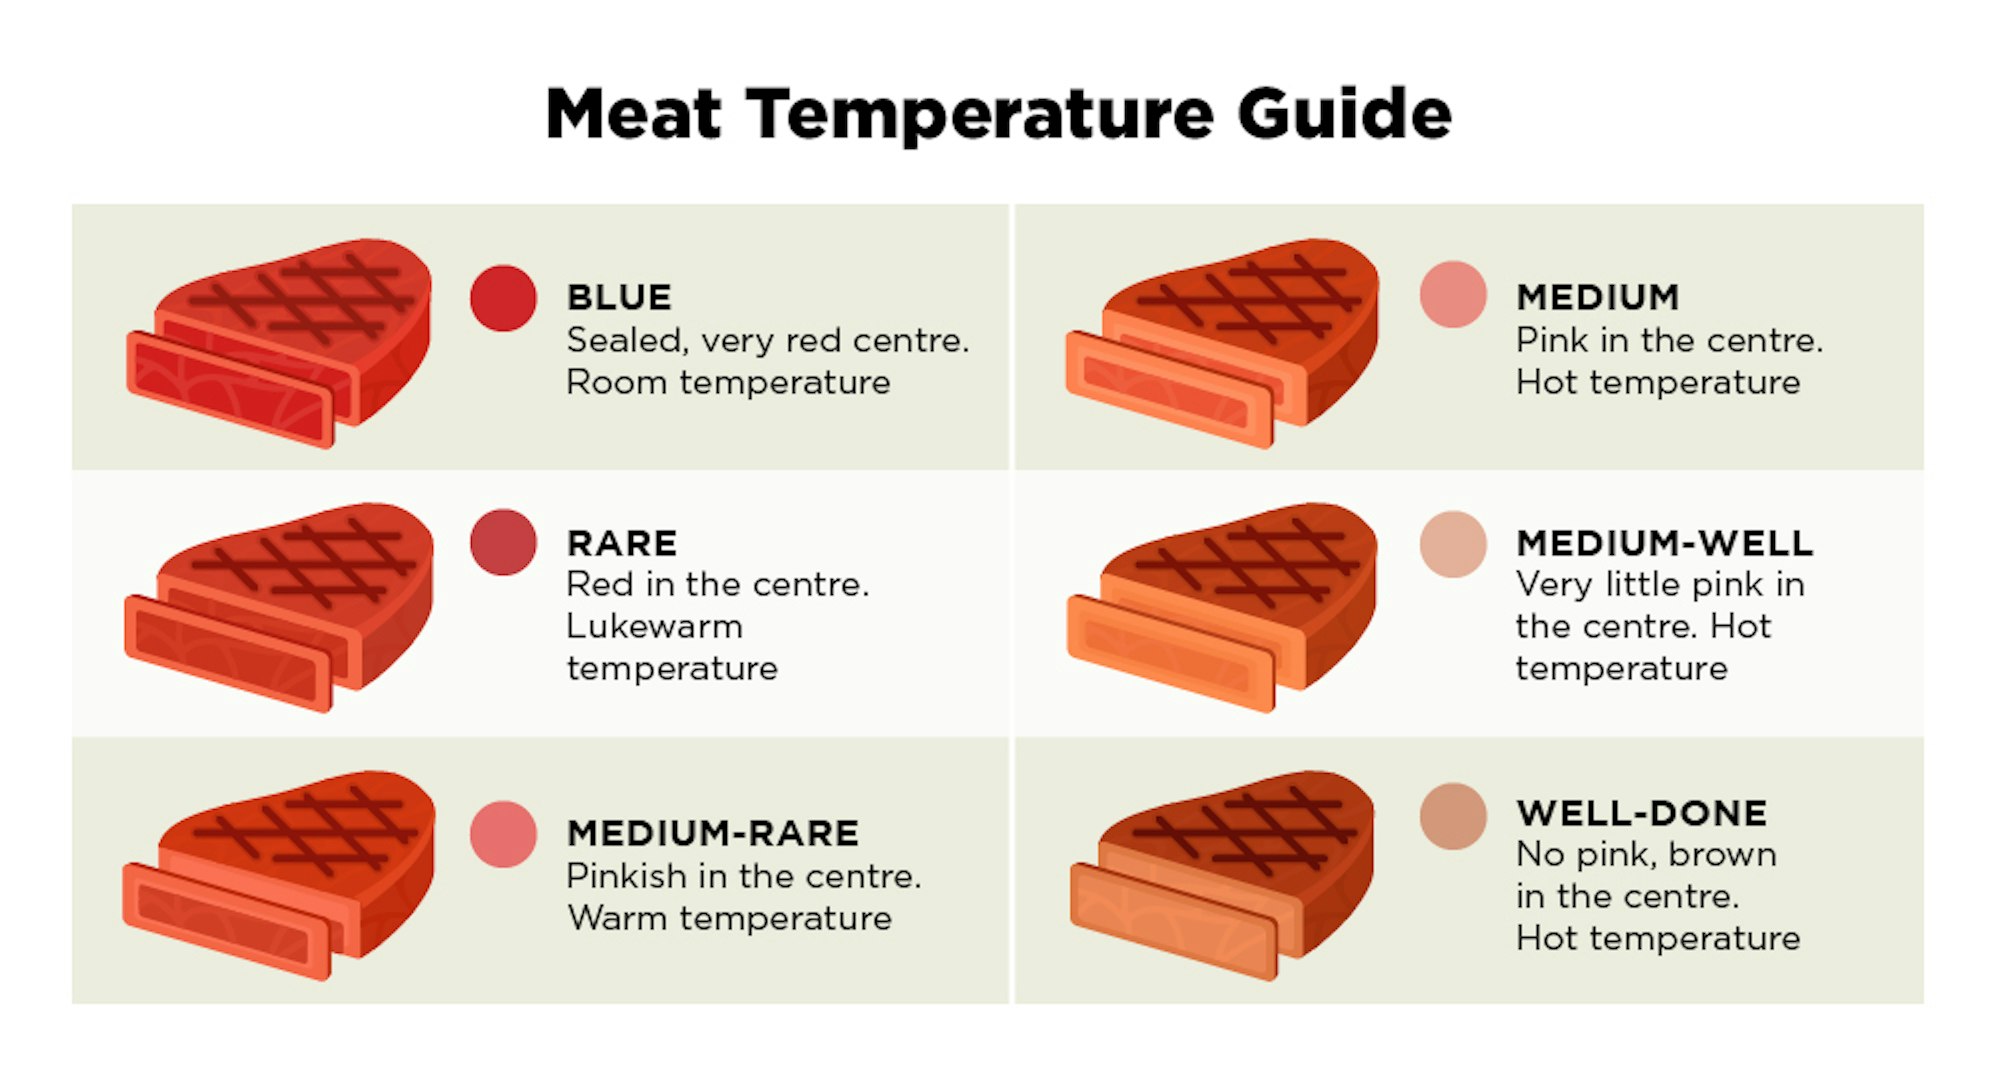 preferred doneness cooking meat temperature guide infographic